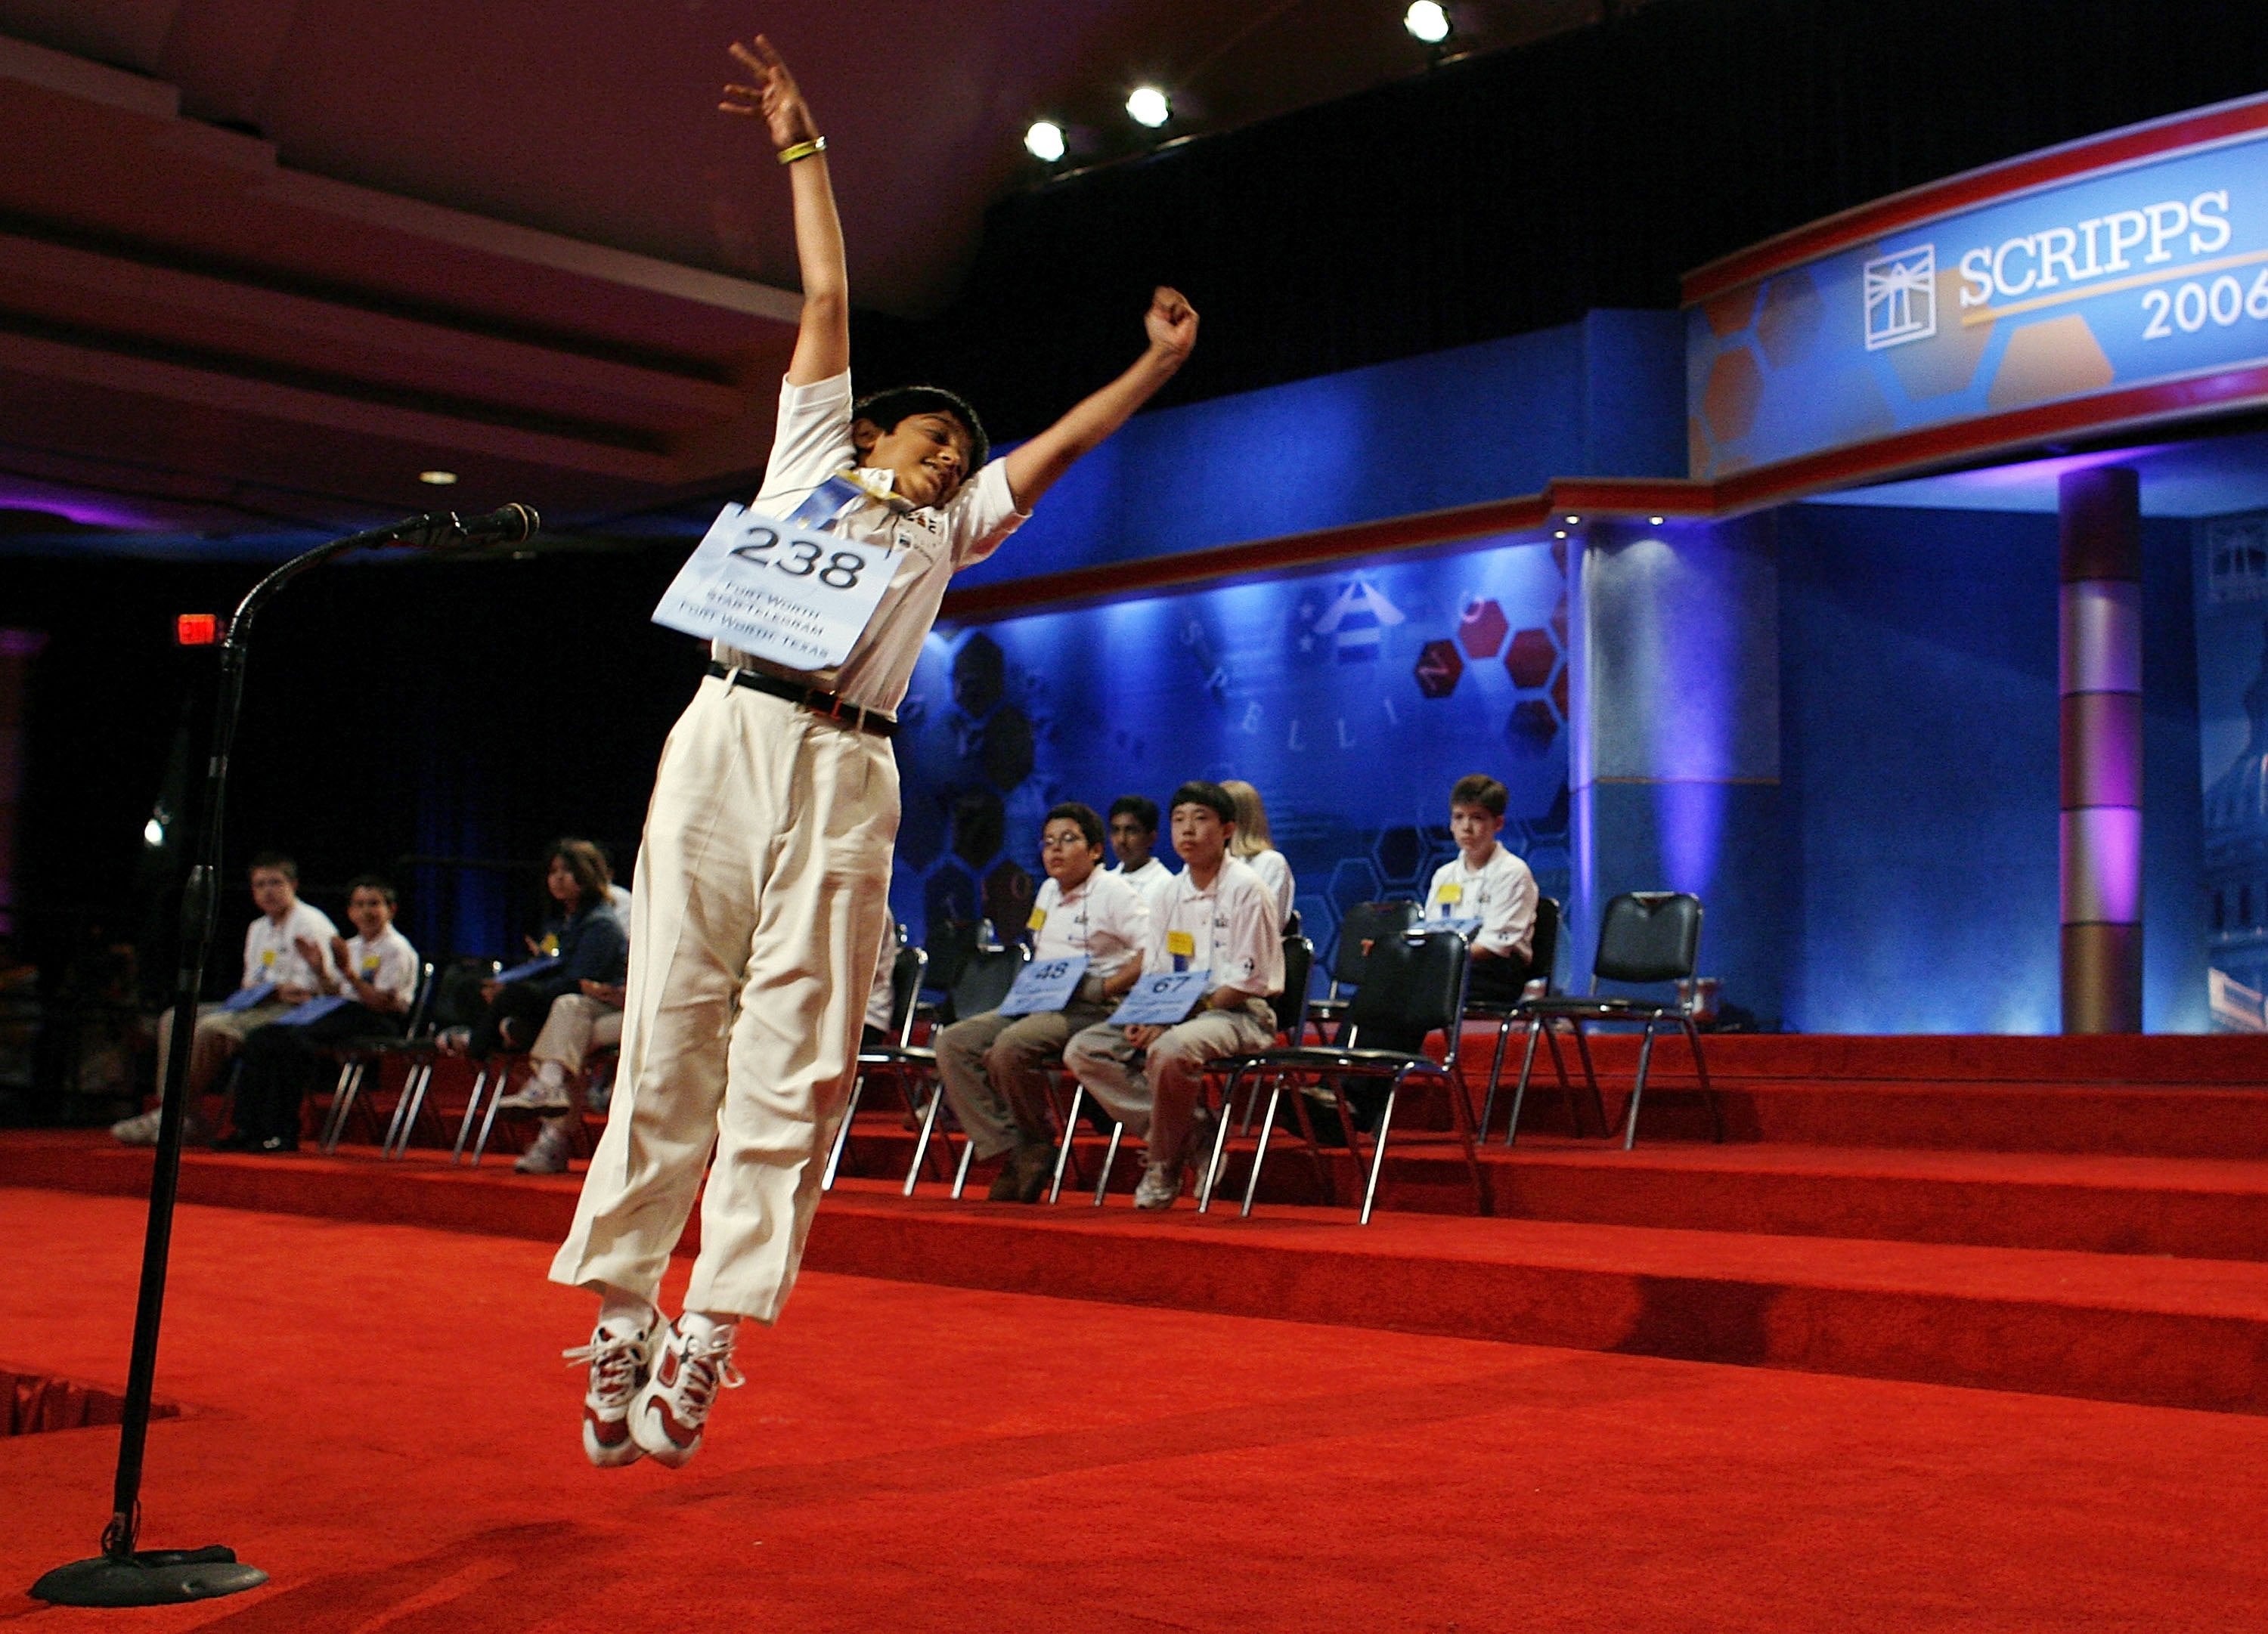 12-year-old Samir Sudhir Patel of Colleyville, Texas, leaps into the air after spelling a word correctly at the 2006 Scripps National Spelling Bee